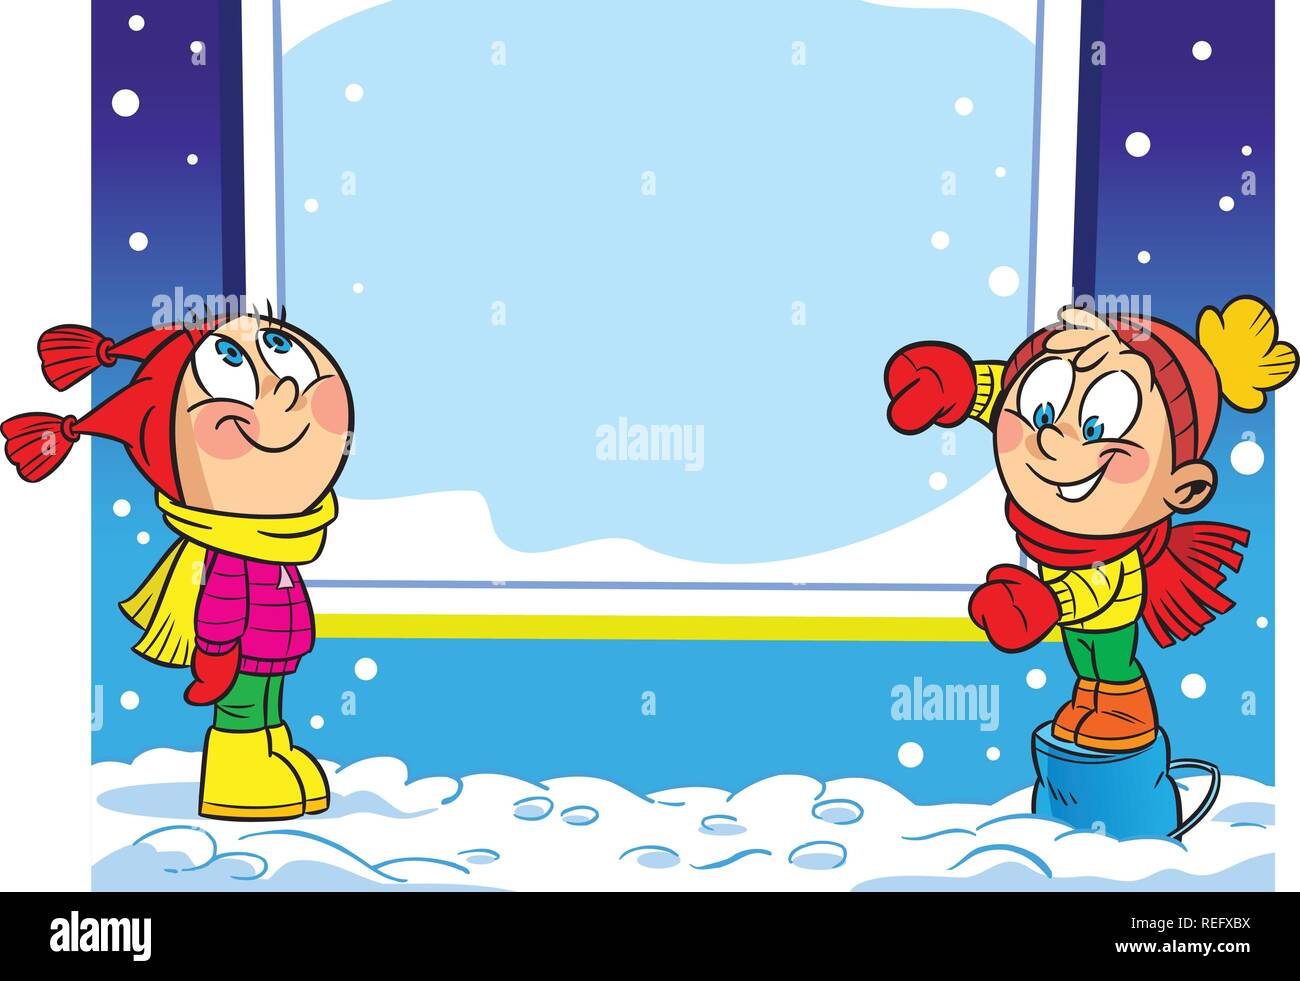 The illustration shows a boy and a girl, who point to an imaginary window on a background of winter nature. There's a place for the text box. Stock Vector